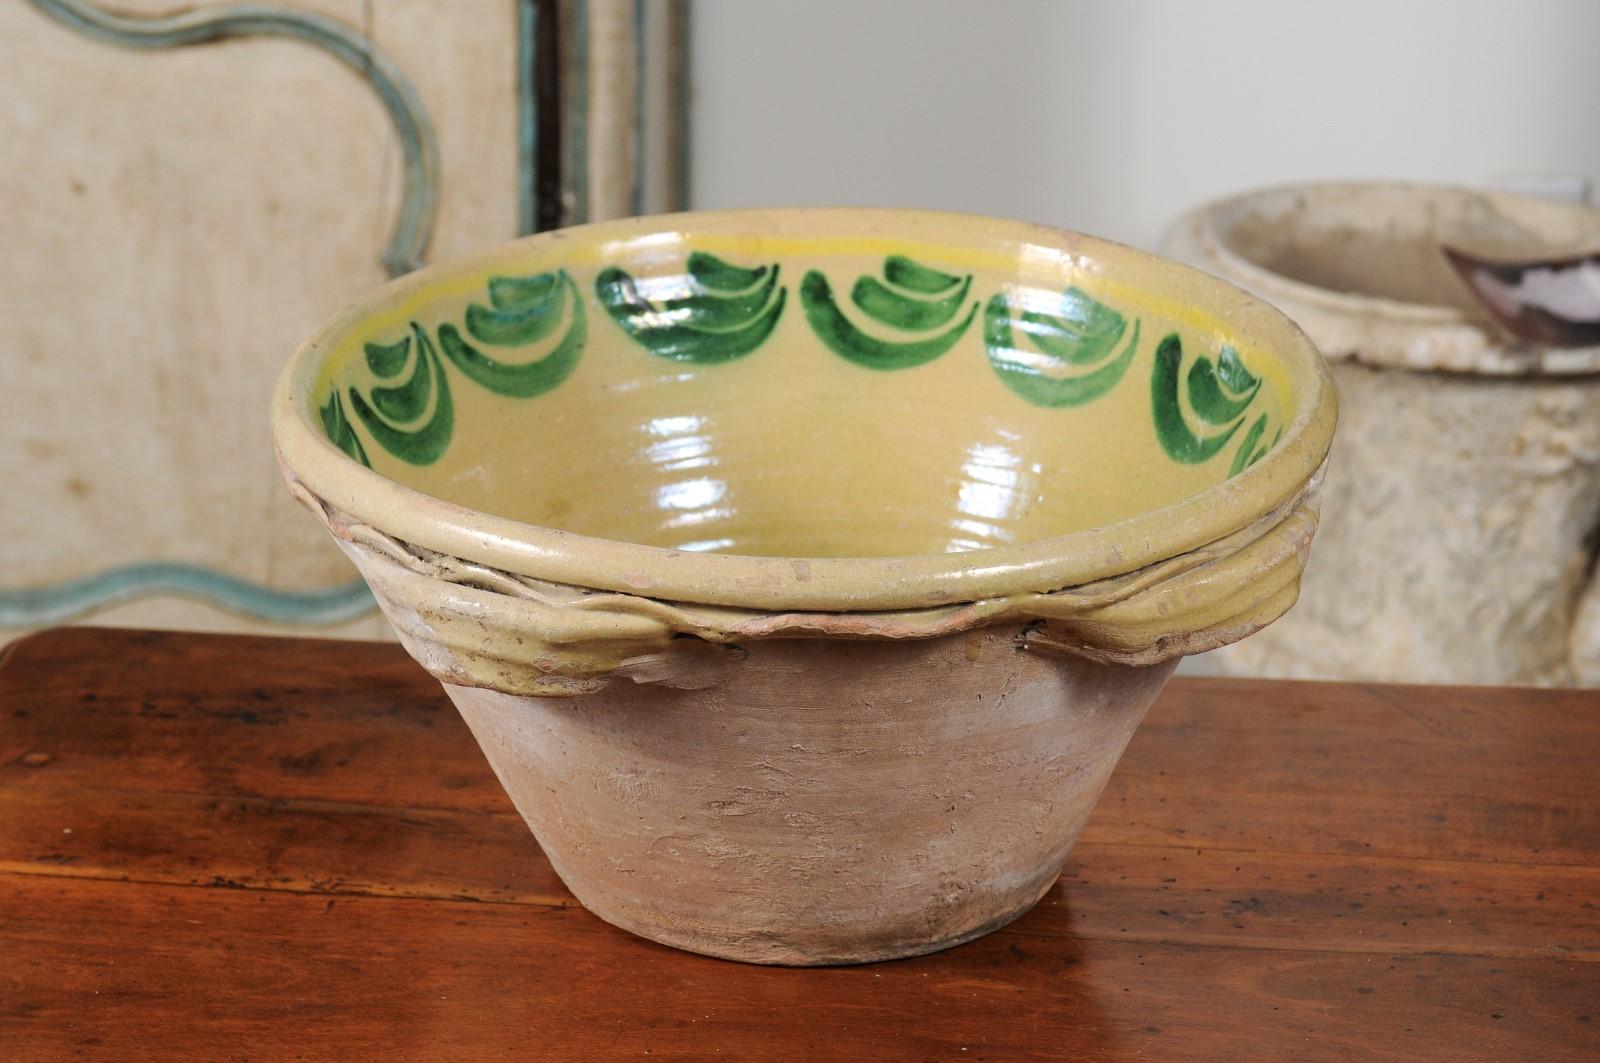 Italian 1820s Yellow Glazed Pottery Bowl from Calabria with Green Accents For Sale 3